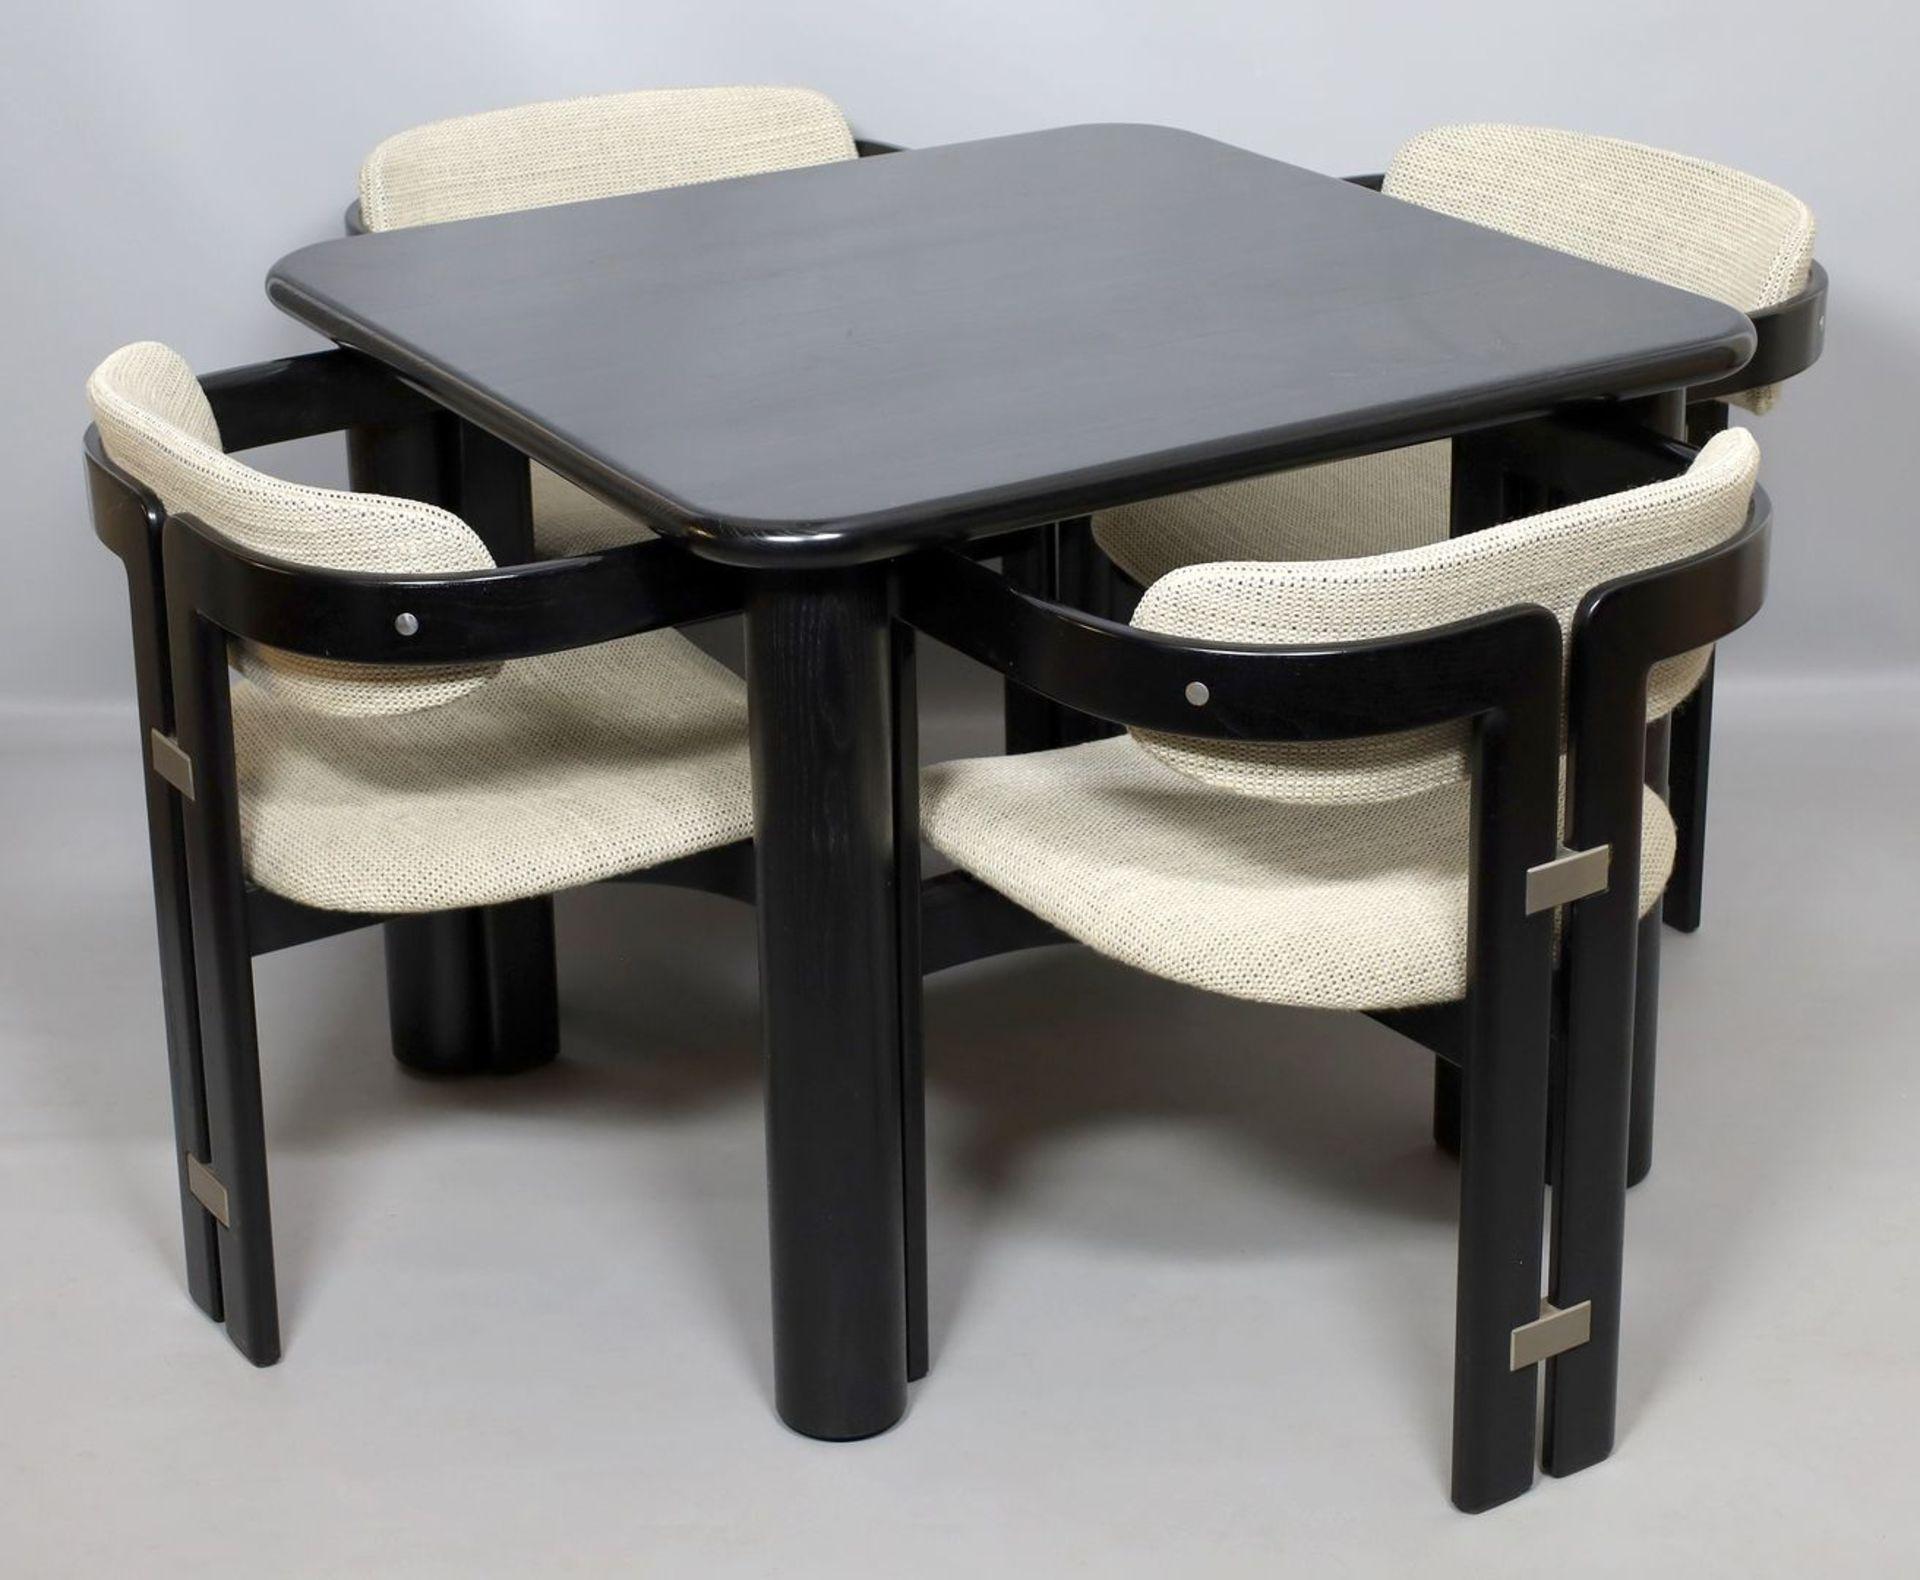 Augusto Savini for Pozzi, set of four 'Pamplona' dining chairs and table 72x 89x 89 cm., lacquered wood, Fabric upholstery, aluminum, Italy, 1965

Set of four armchairs in black lacquered wood and fabric upholstery. A characteristic design;